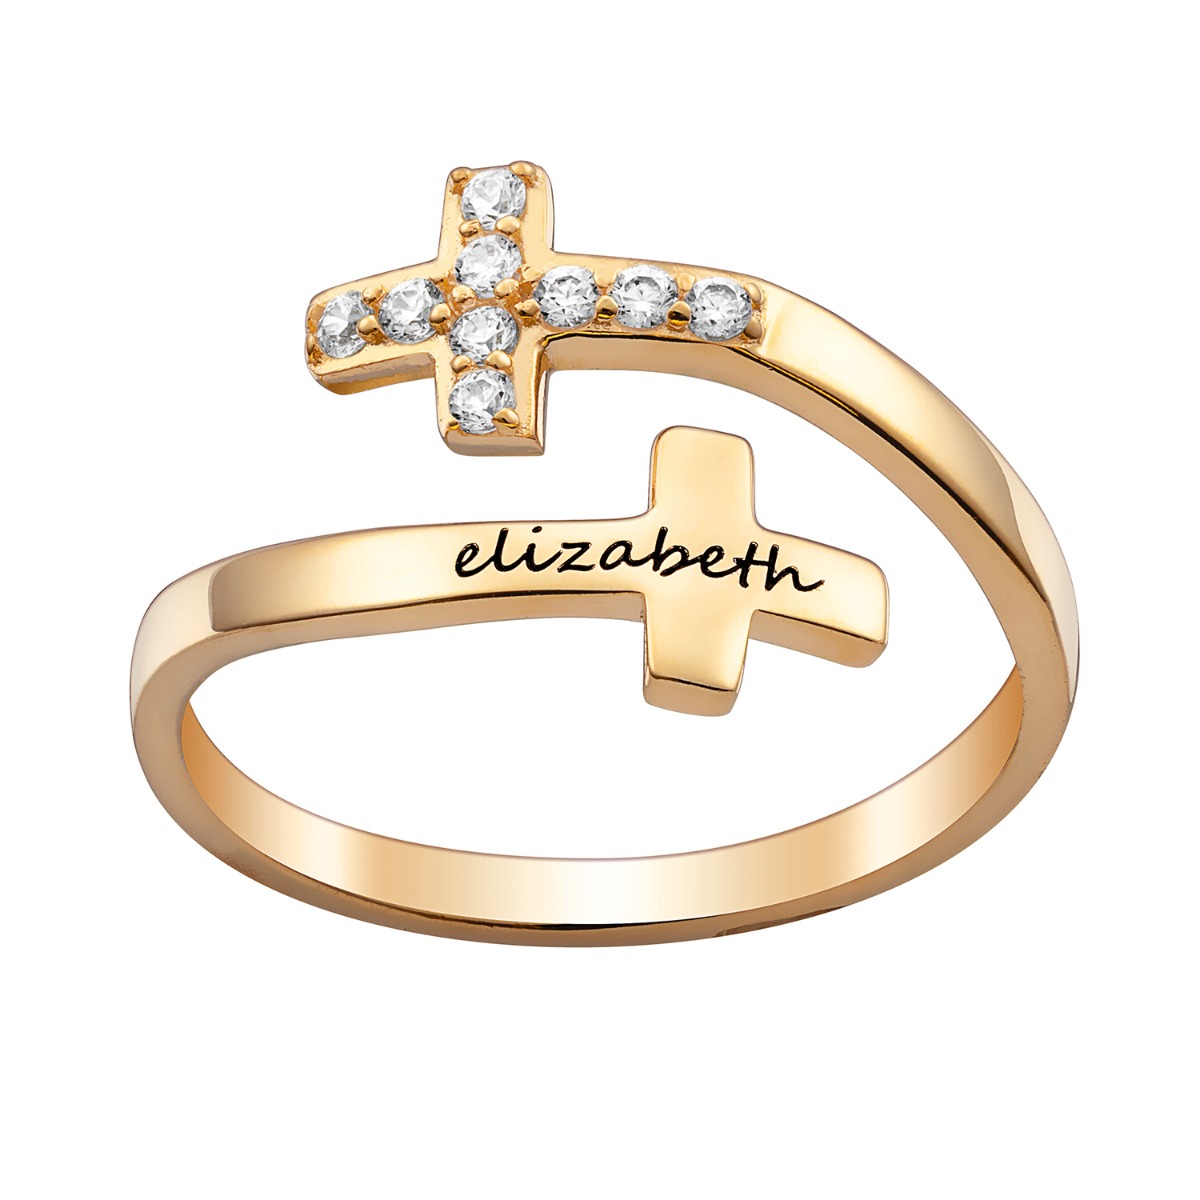 14K Gold over Sterling Engraved Name Double Cross Ring with Crystals